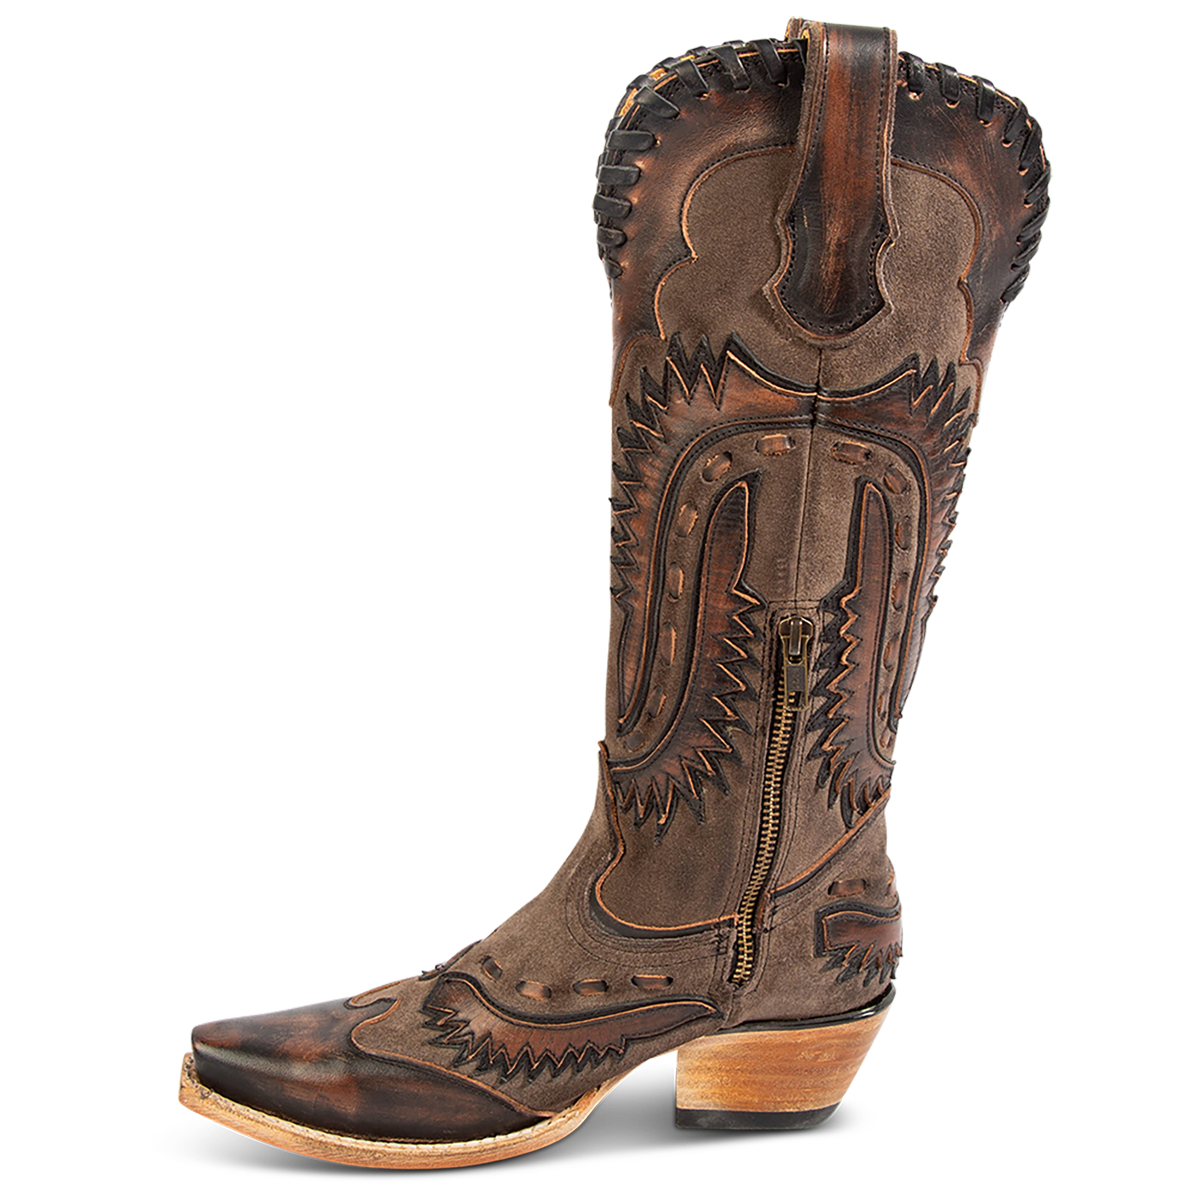 Inside view showing FREEBIRD women's Wayne black multi leather western mid-calf boot with whip-stitch and laser cut detailing, a snip toe and inside working brass zipper